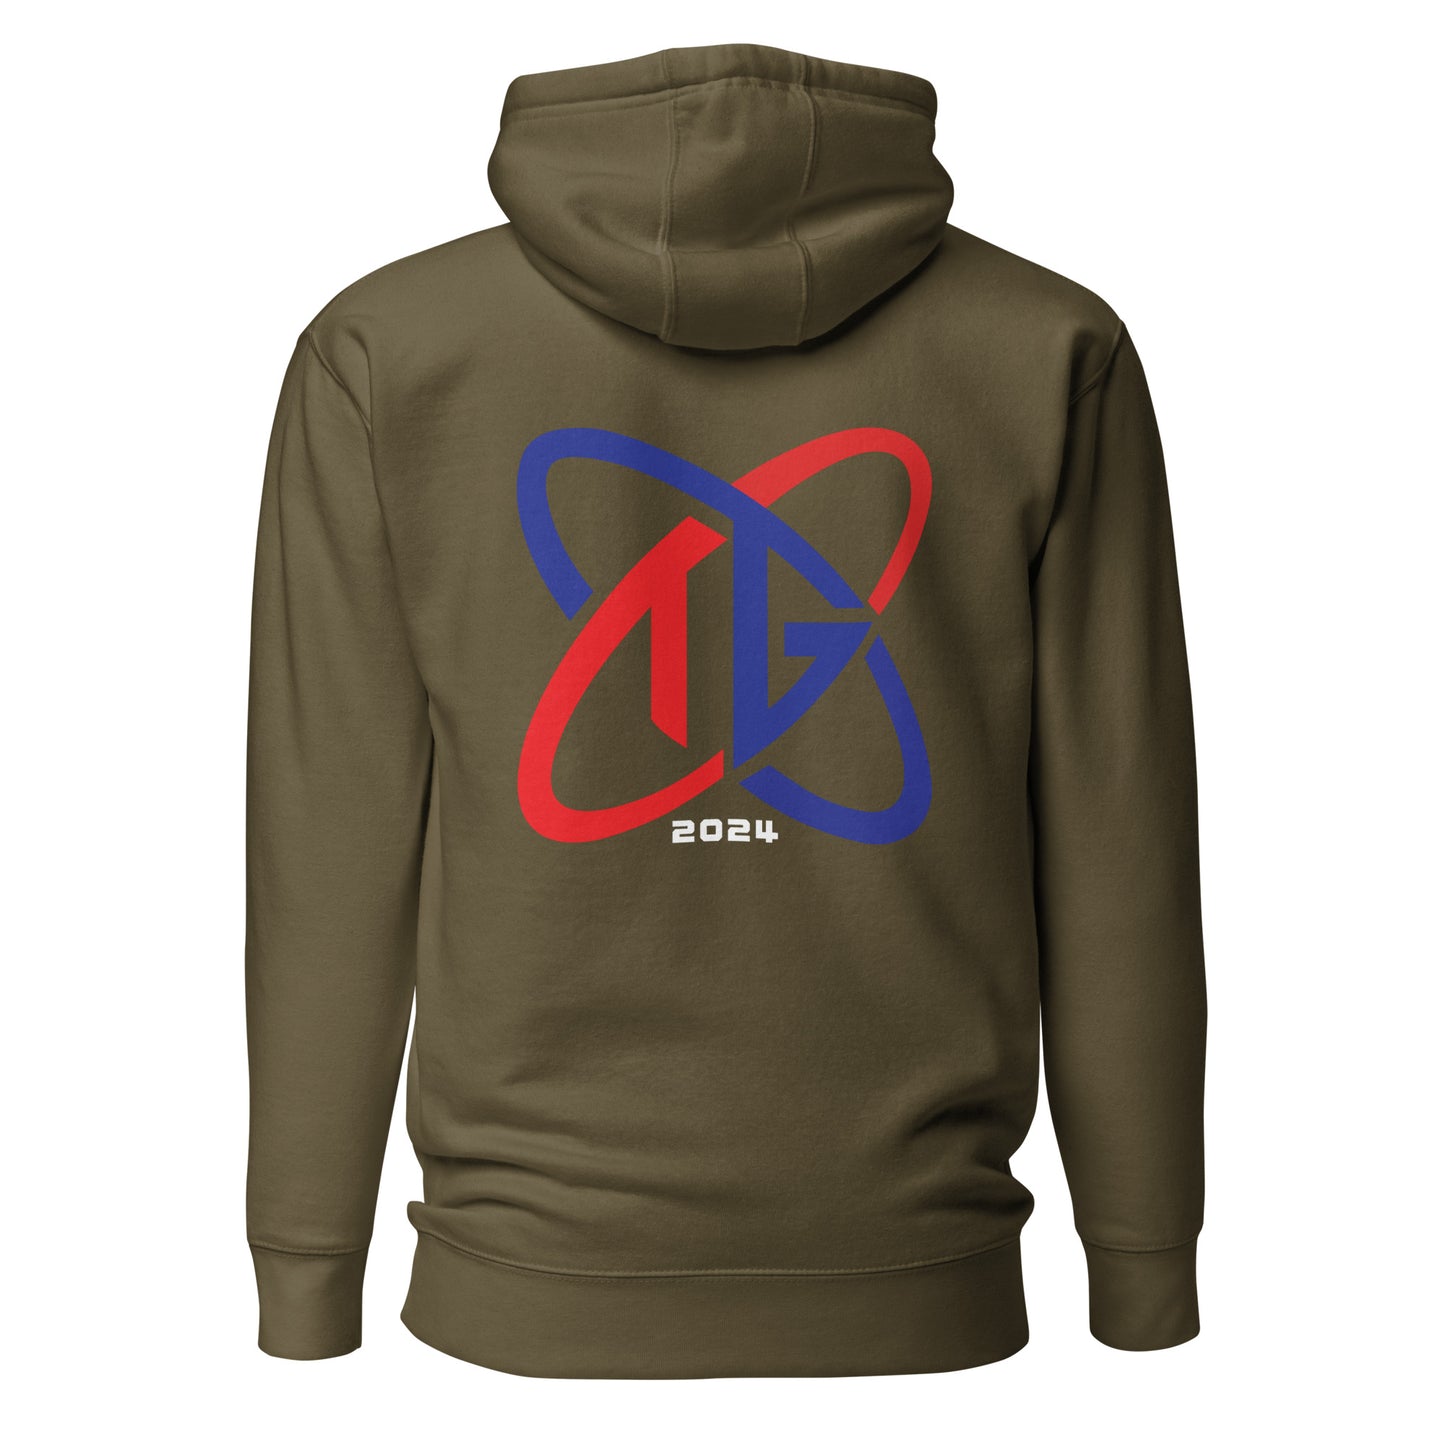 The Official "Classic" Premium Pullover TG HOODIE! - 2024